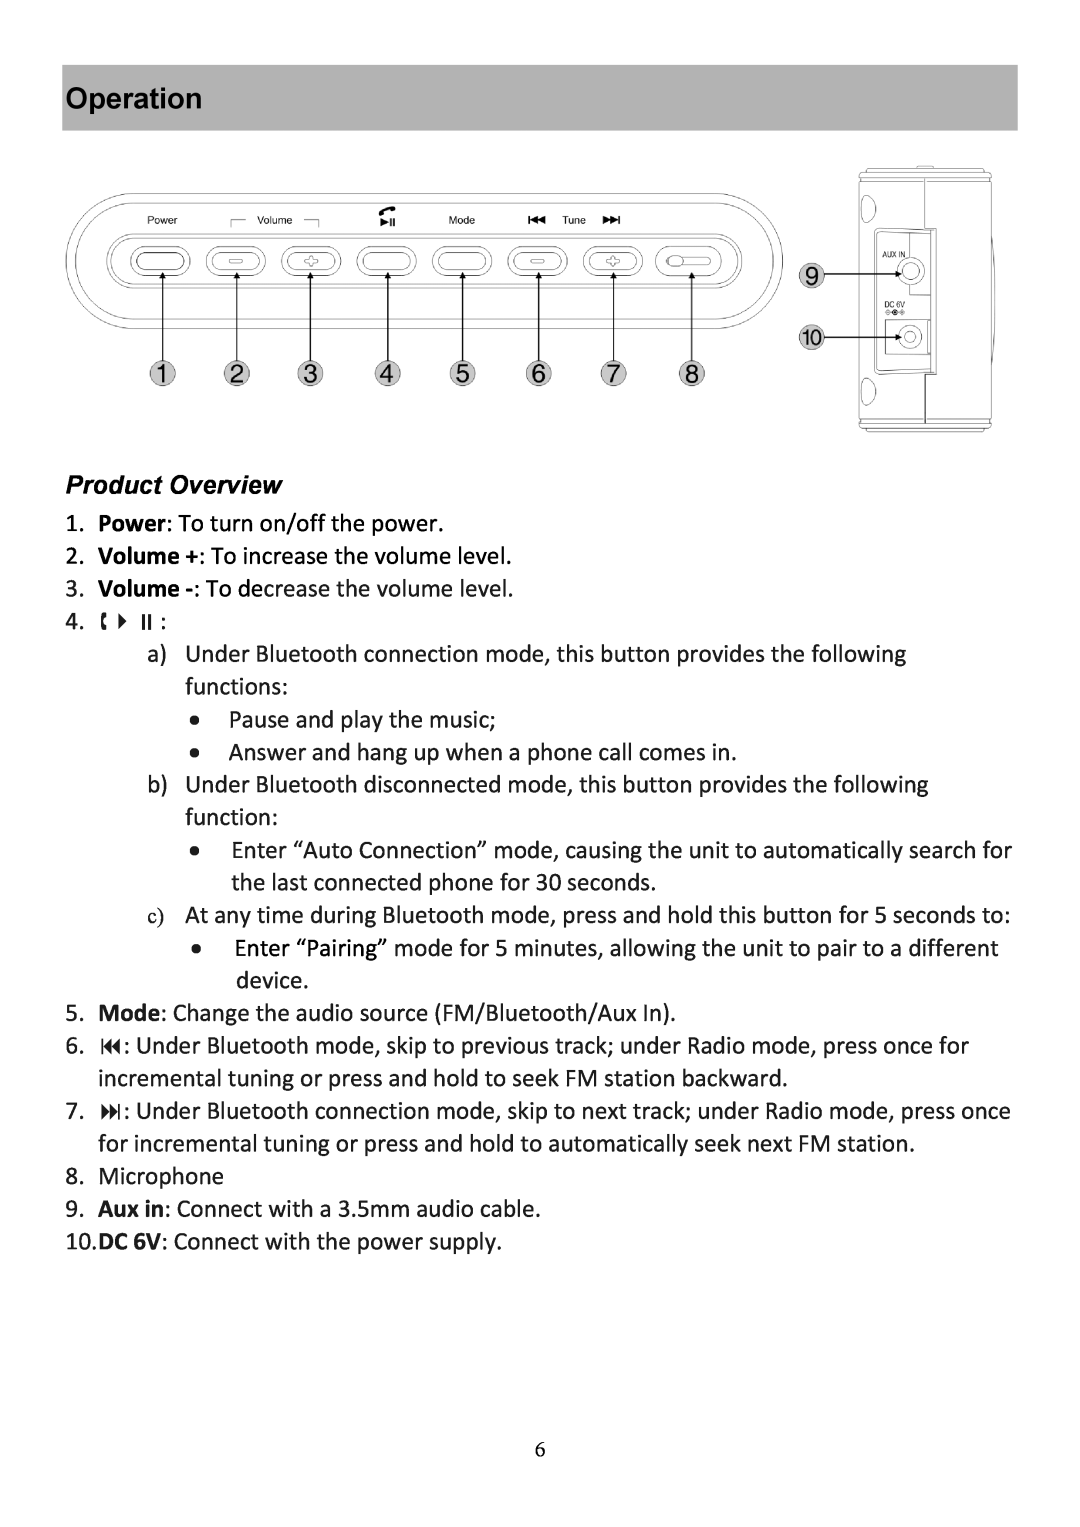 Audiovox CE208BT user manual Operation, Product Overview 